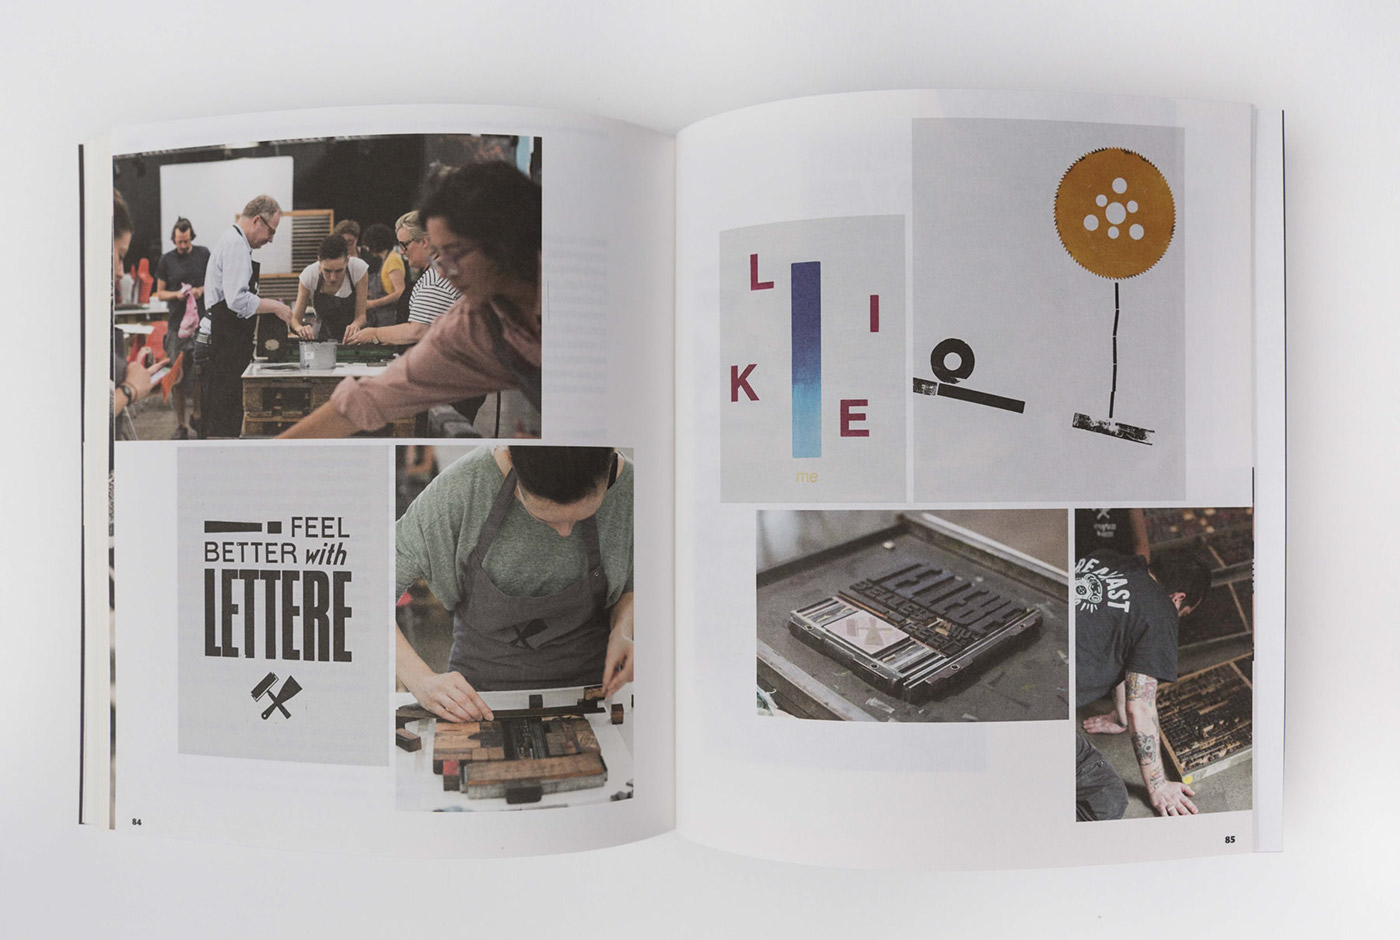 Layout Design book fear lazy dog press letterpress workers graphic design 